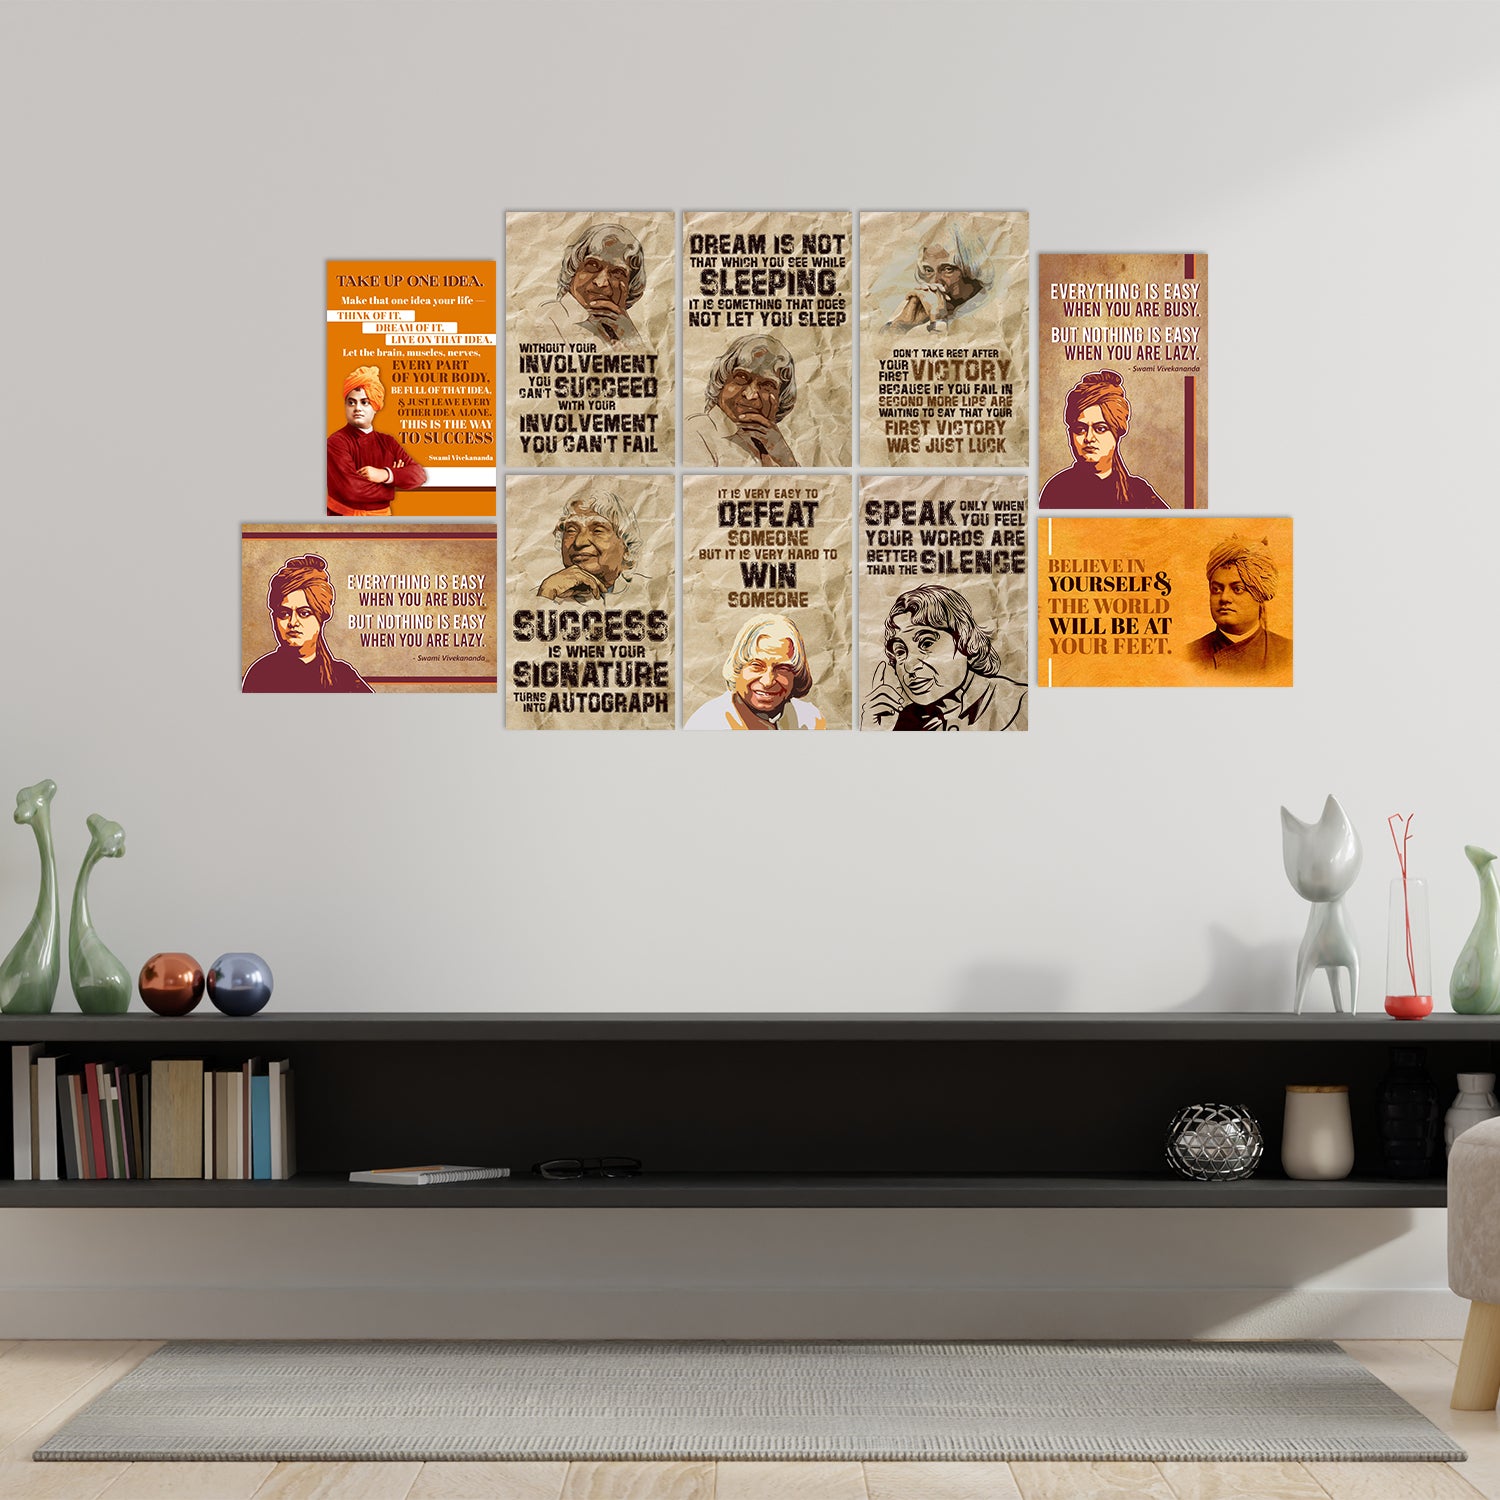 Set of 10 Dr. Abdul Kalam Inspirational Quotes High Quality Printed 300 GSM Posters with Glue Drops